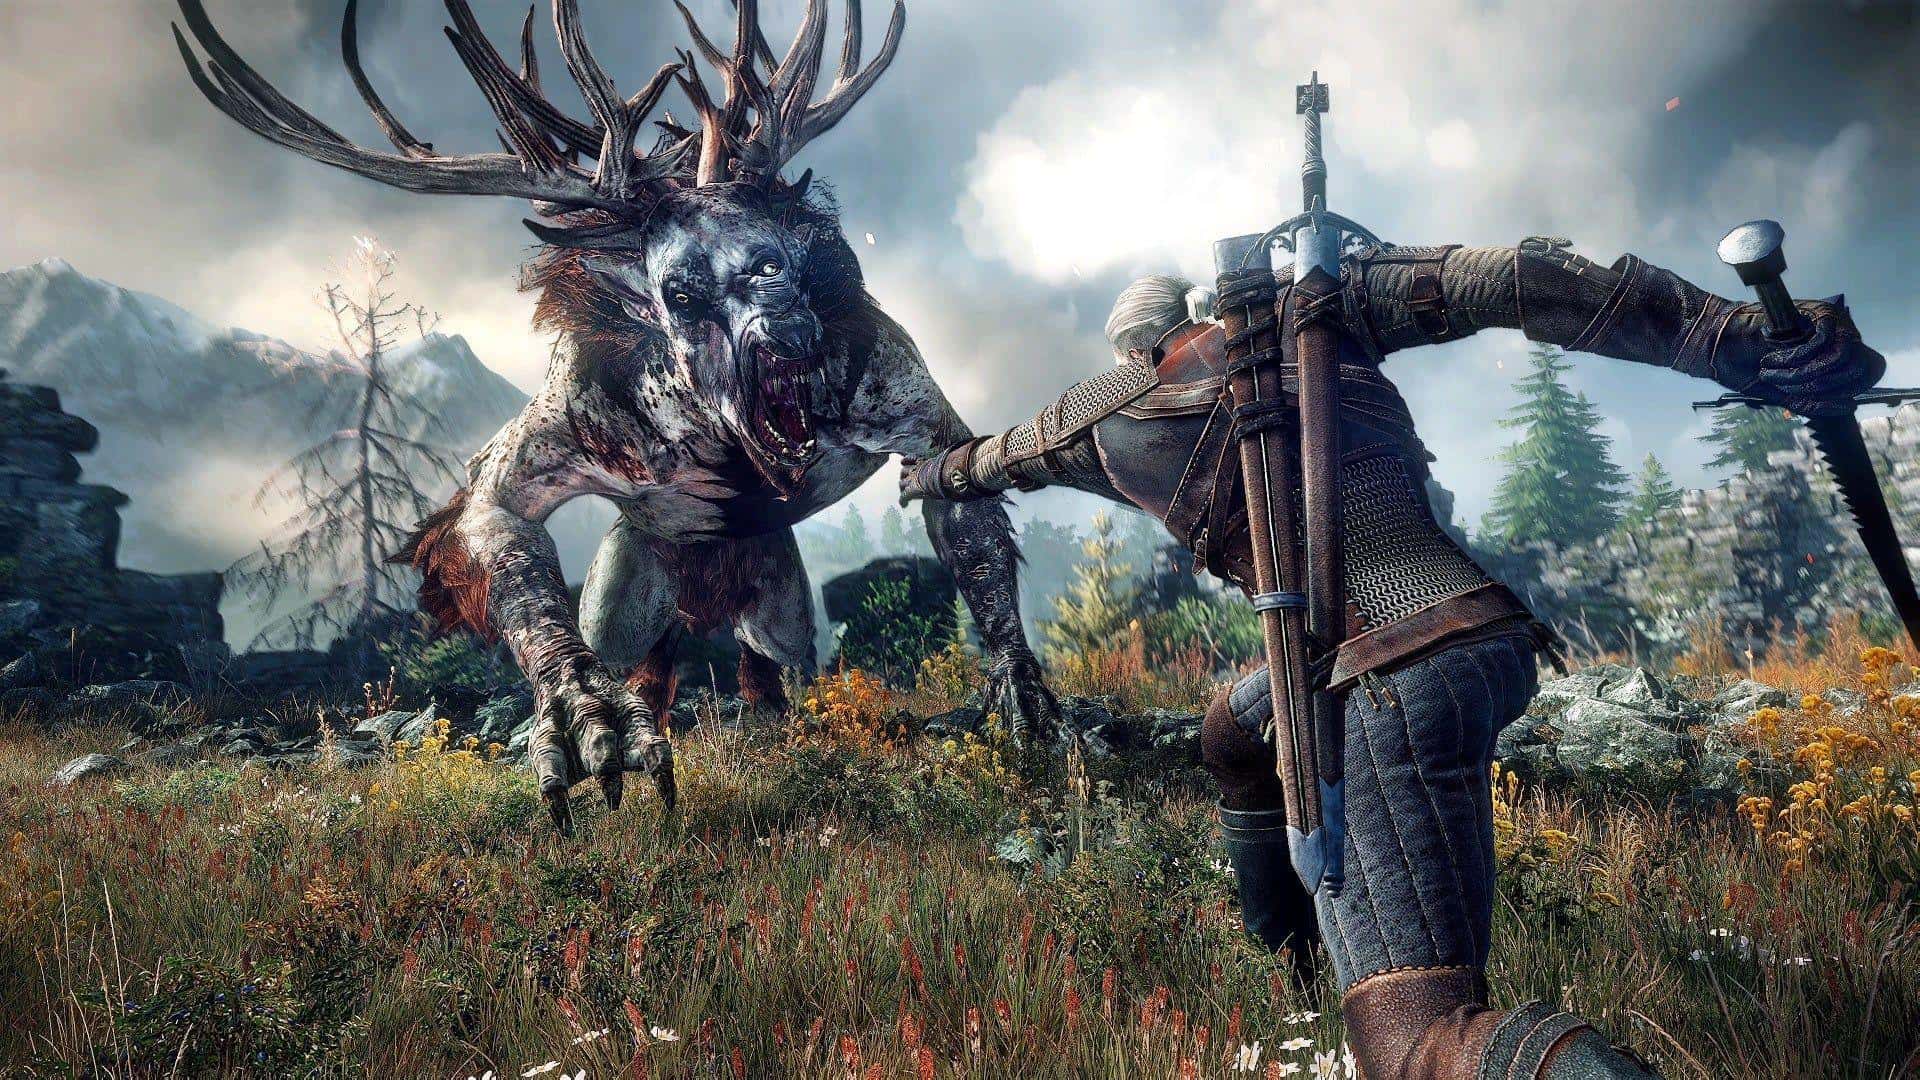 which is better skyrim or witcher 3